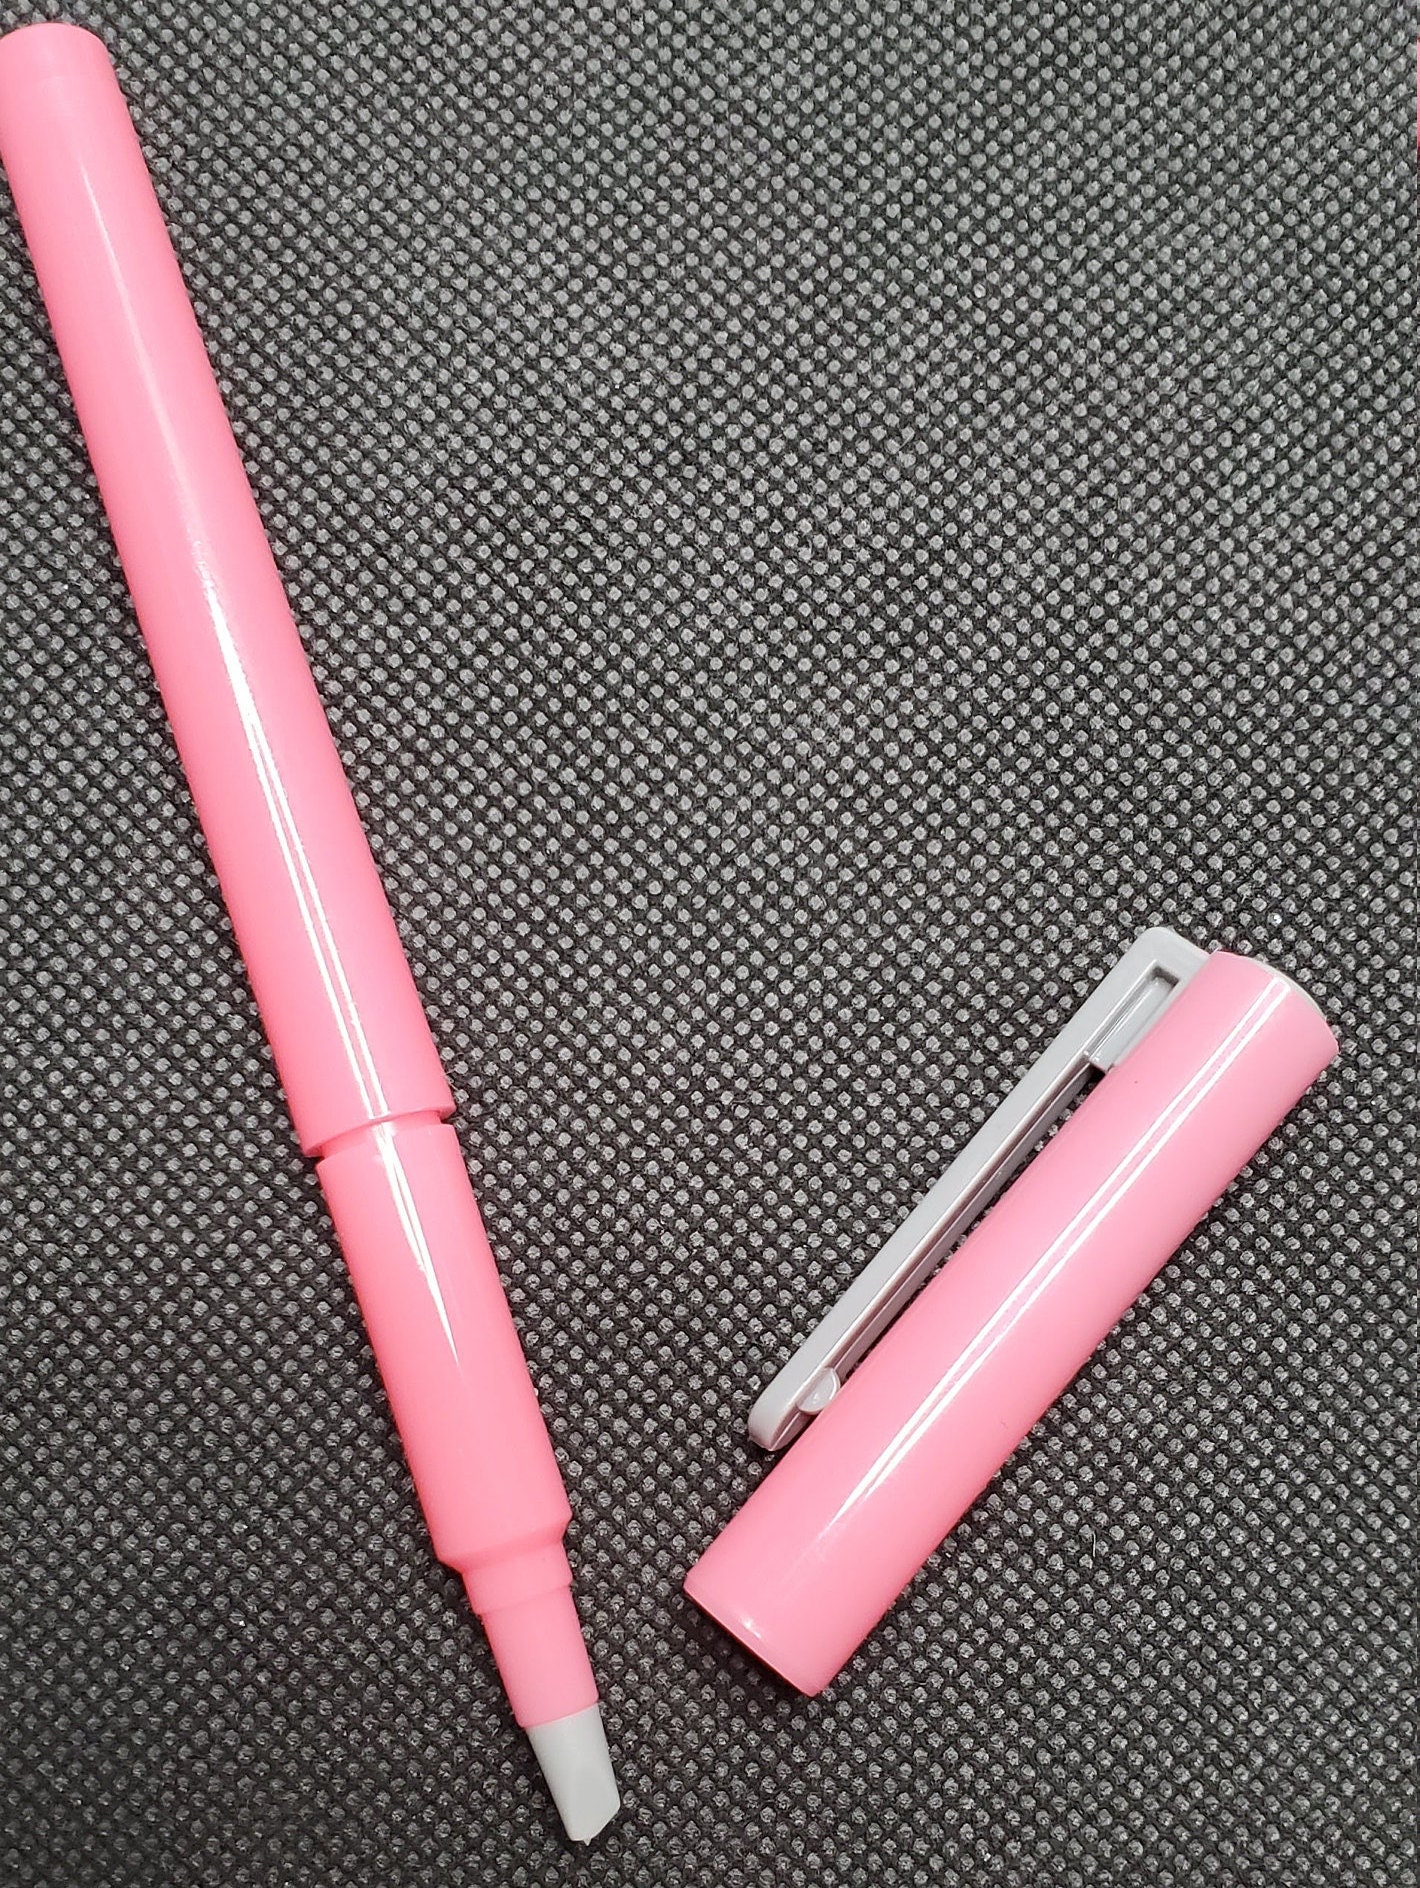 2 Pcs DIY Diamond Painting Parchment Paper Cutter Precision Craft Ceramic  Blade Knife Pen for Cutting Paper Art with Replaceable Blade, Pink, Blue